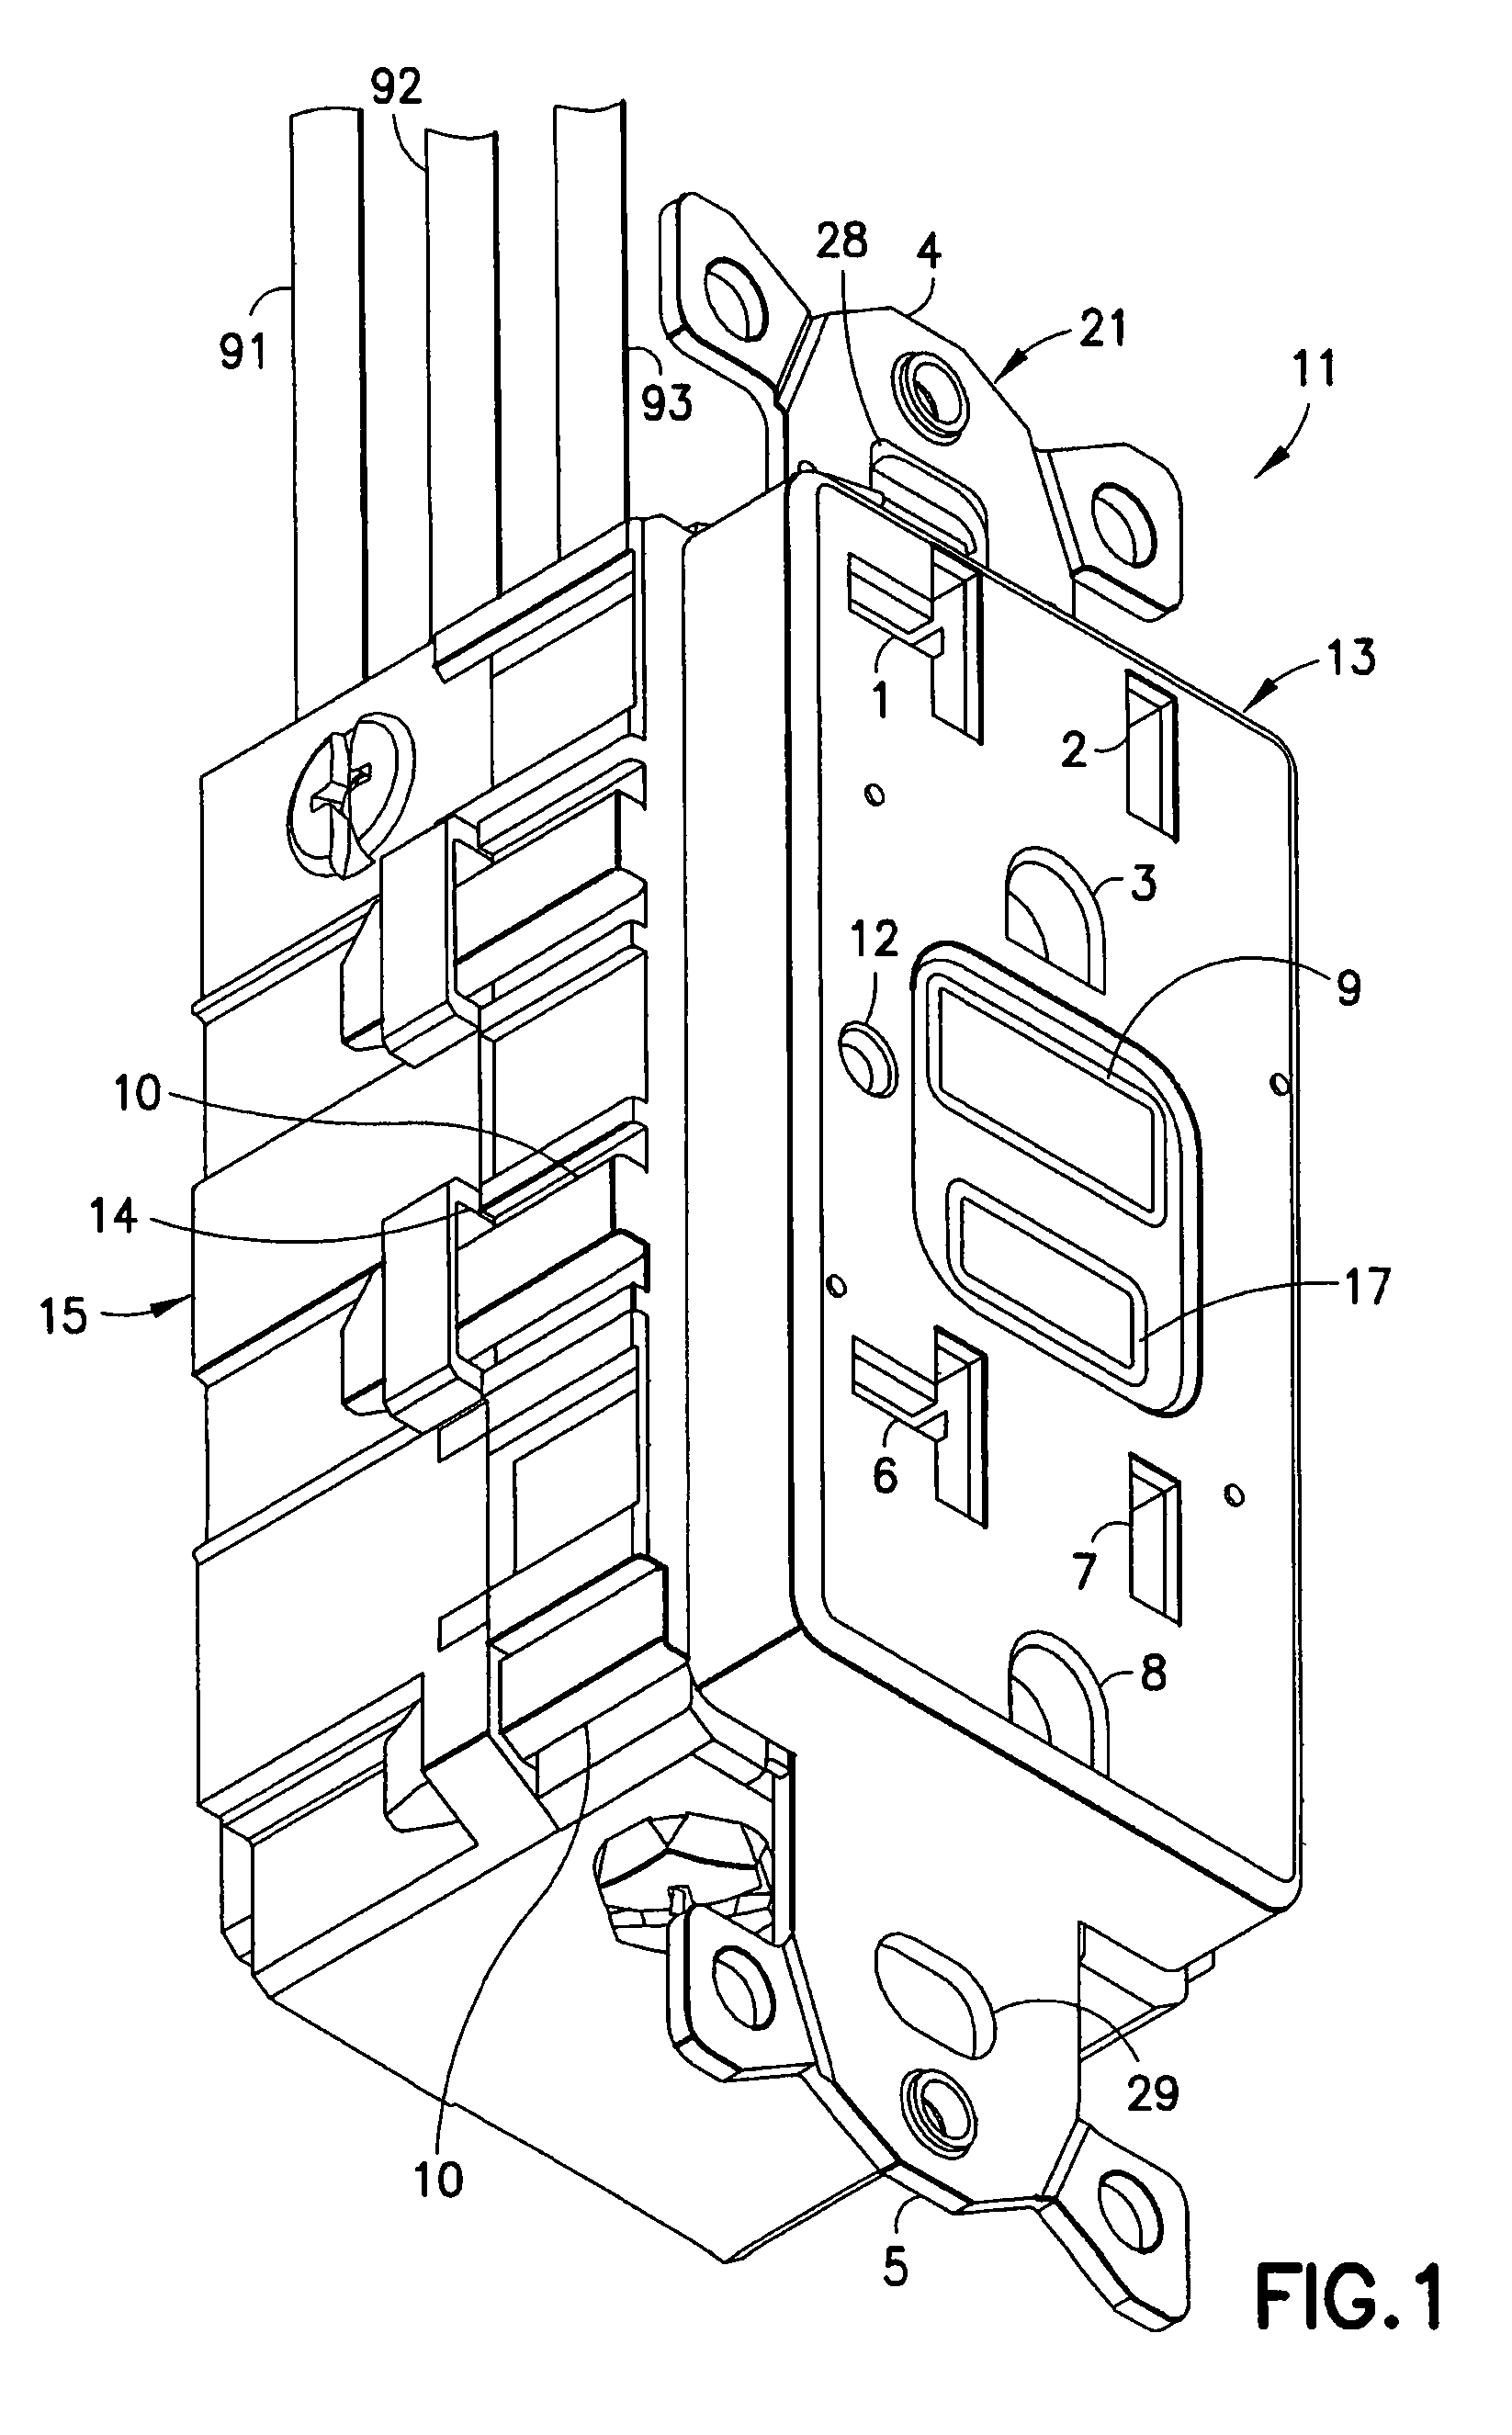 Low profile electrical device assembly